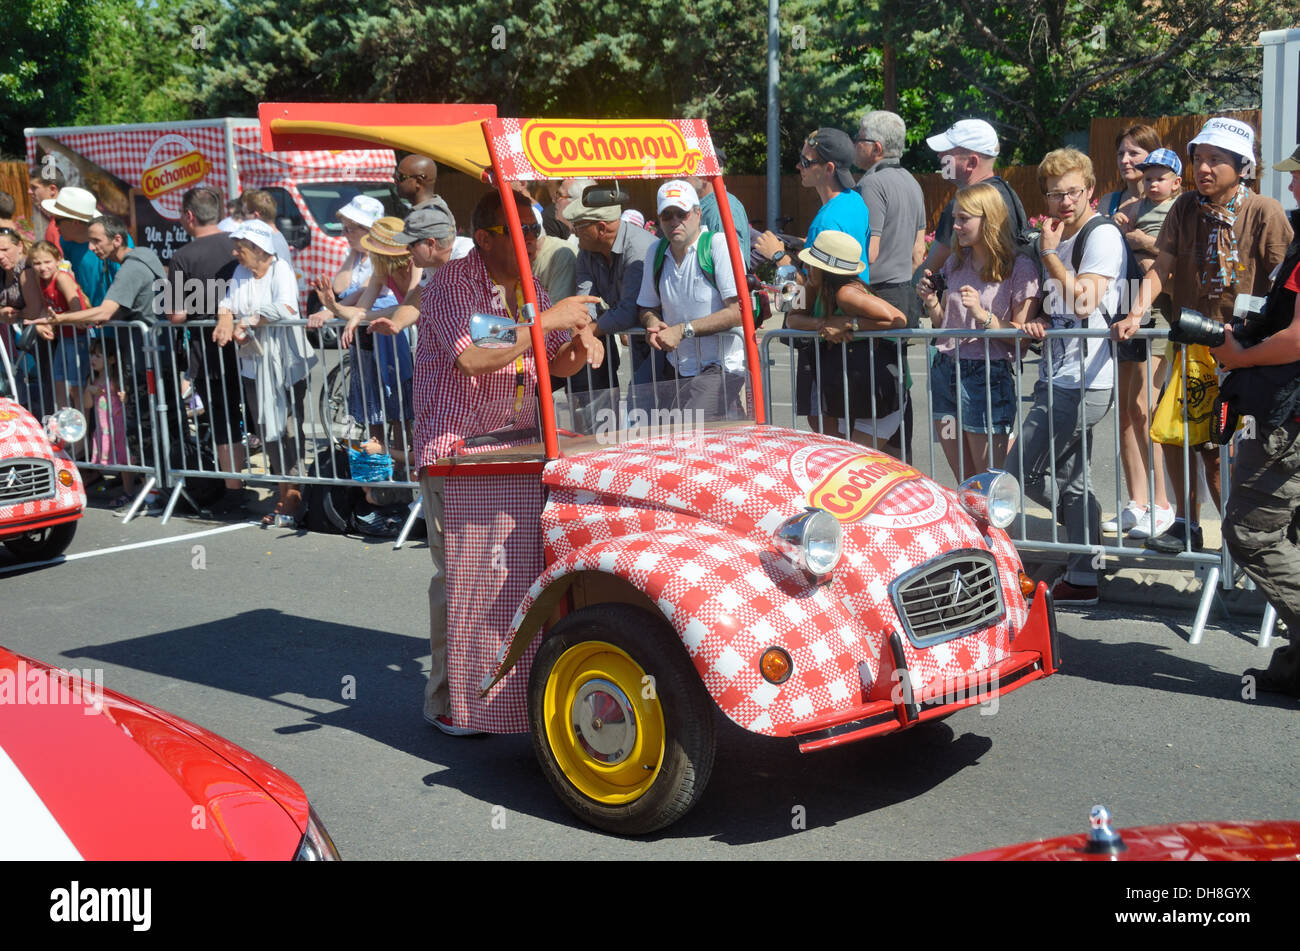 Modified Citroen 2CV, Custom Car or Customised Car Used as Advertising Vehicle during the Tour de France Aix-en-Provence France Stock Photo